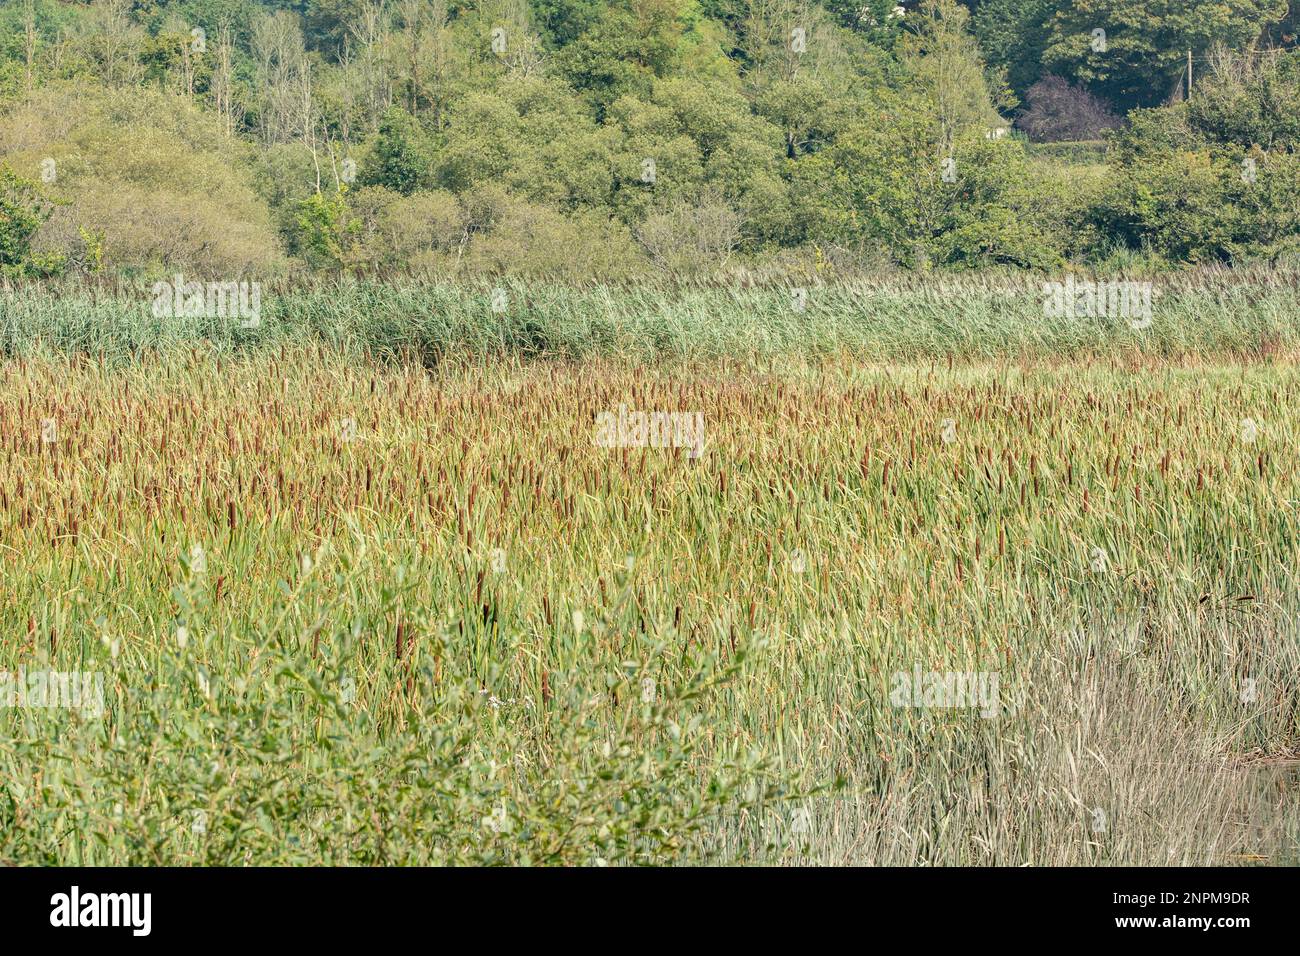 Reedbed (Cat's-tail and Common Reed species) - Typha latifolia and Phragmites communis. Typical wetland plants of UK. Stock Photo